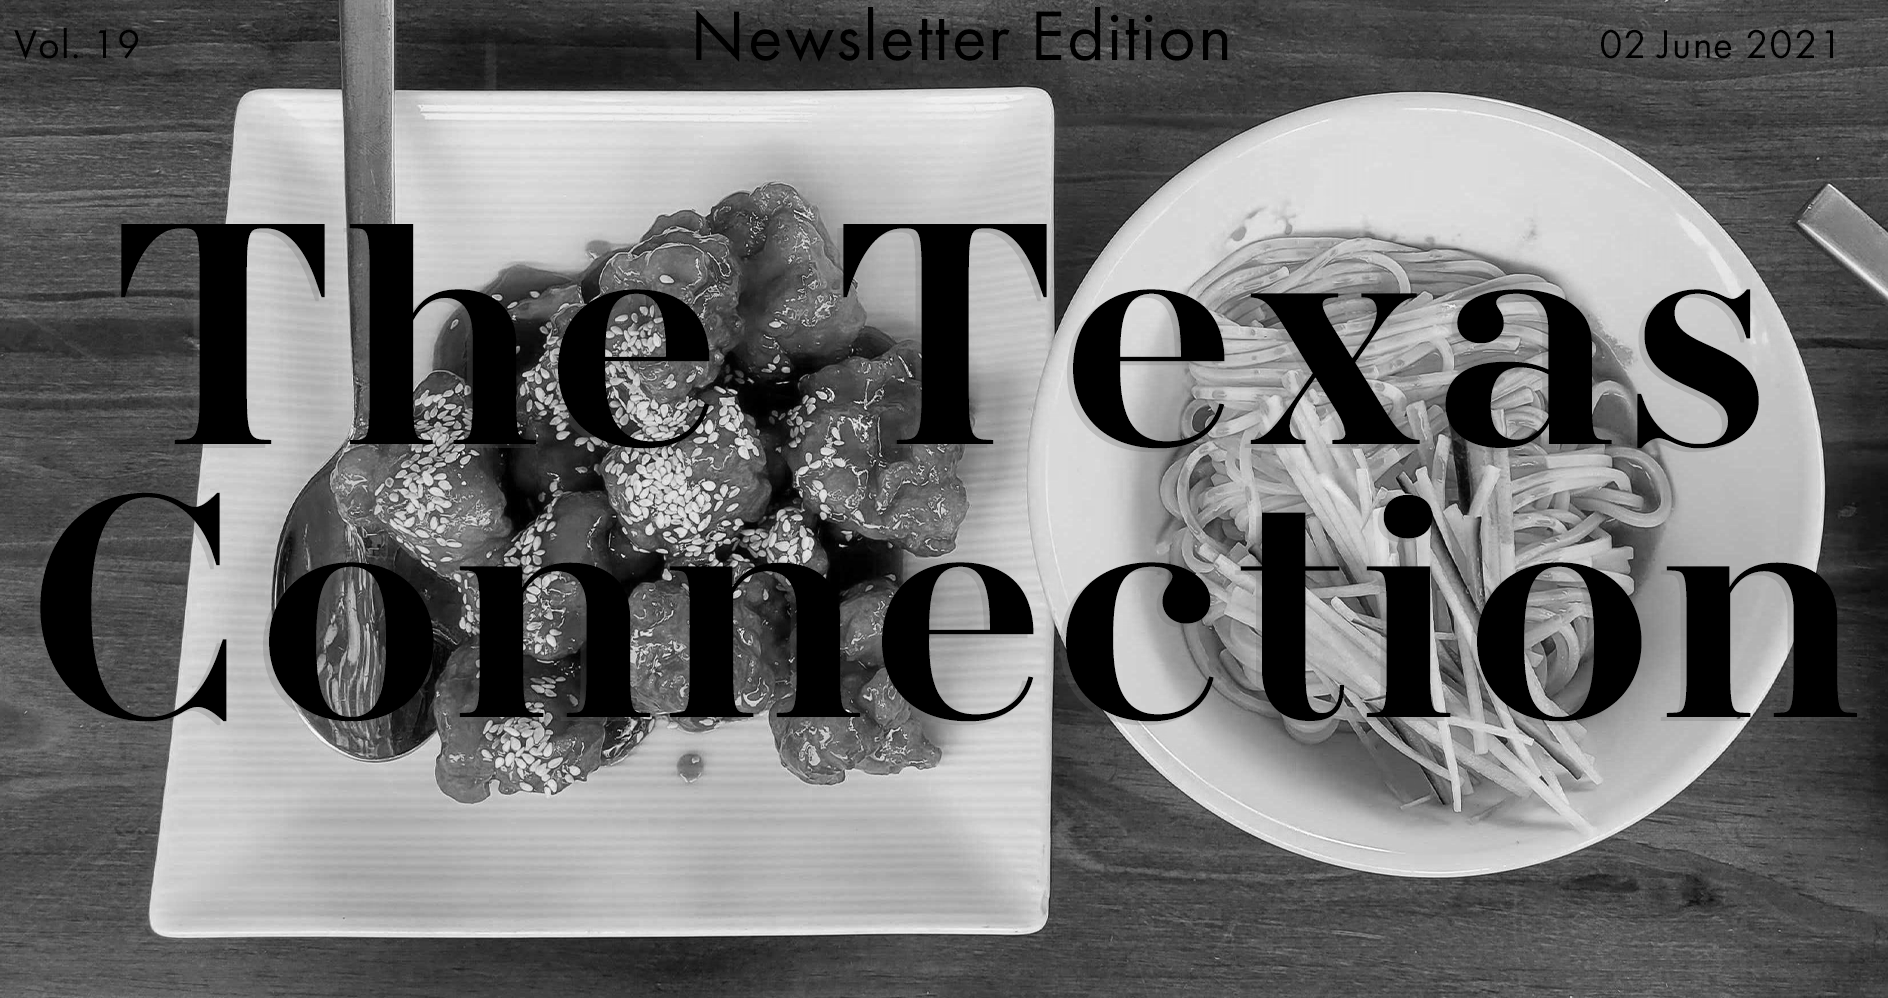 The Texas Connection Vol. 19